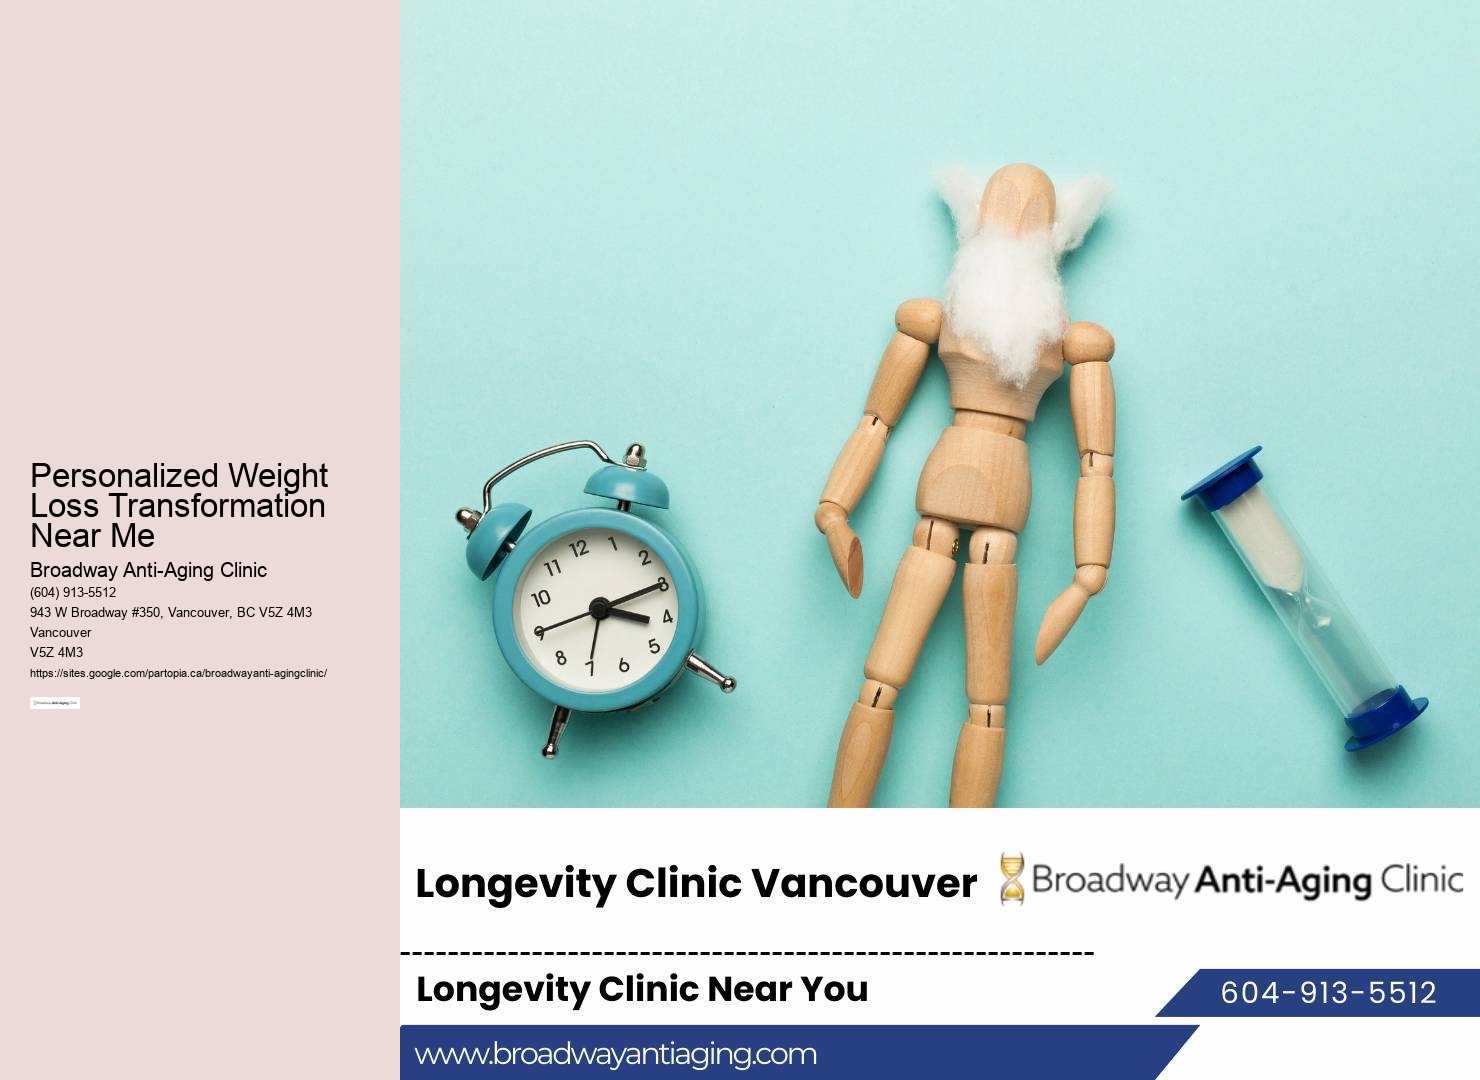 Vancouver Clinic Near Me